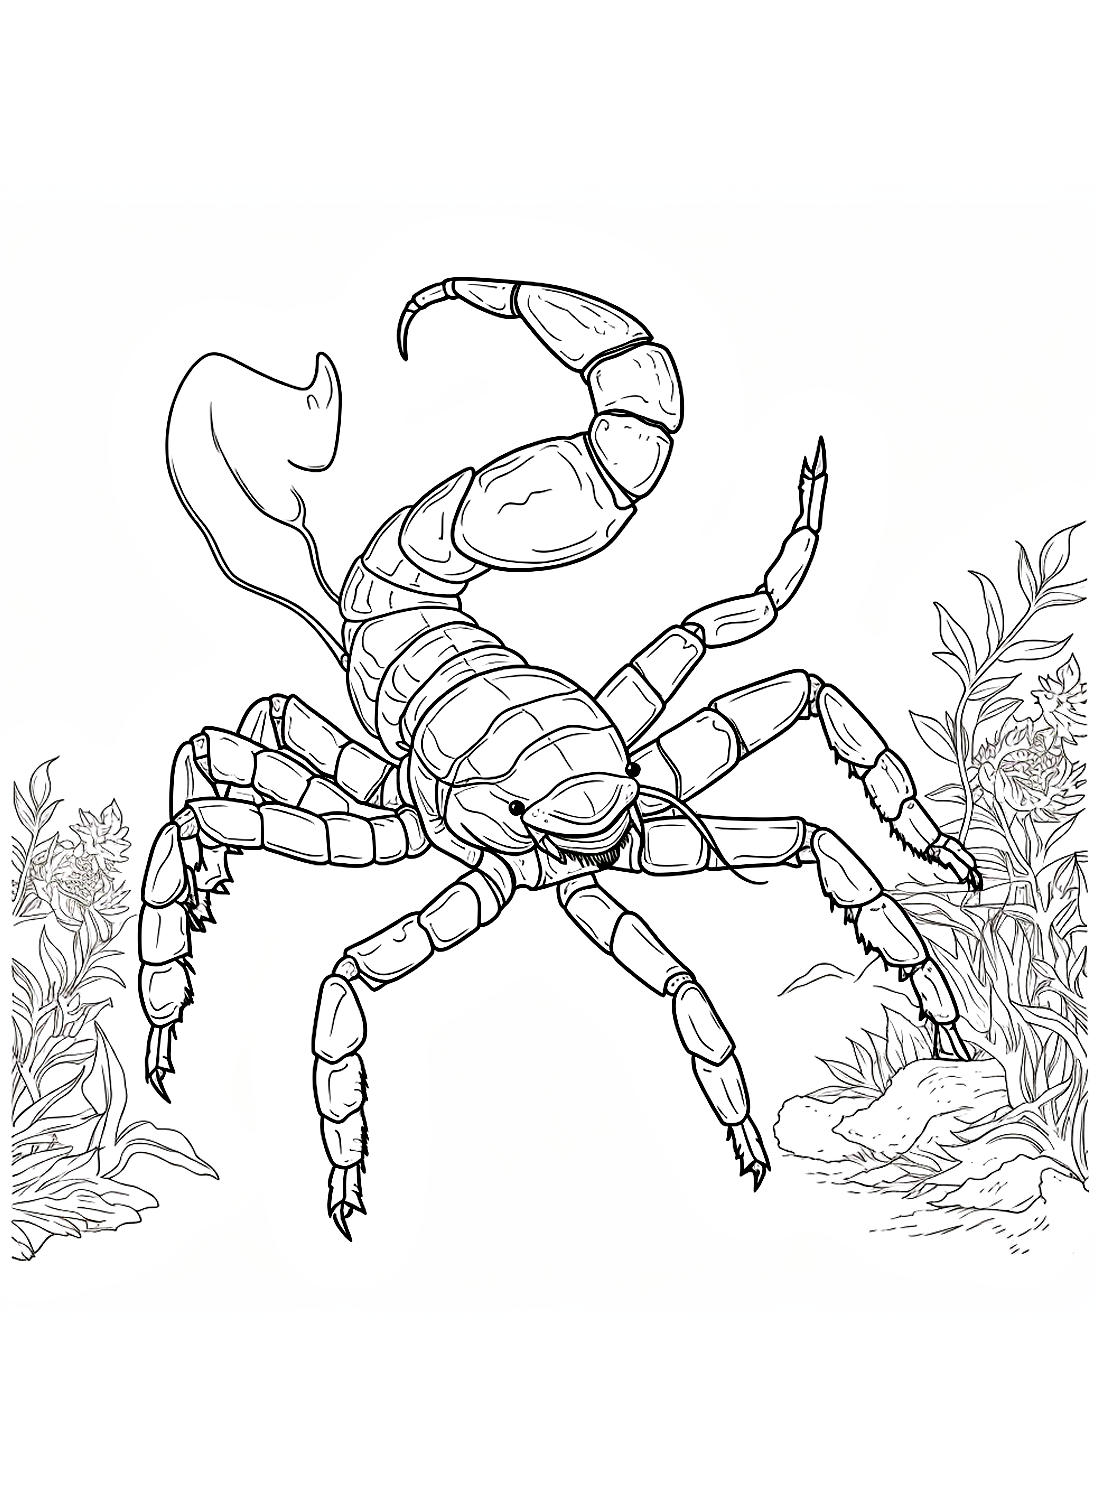 a Scorpion and the tree Coloring Page - Free Printable Coloring Pages